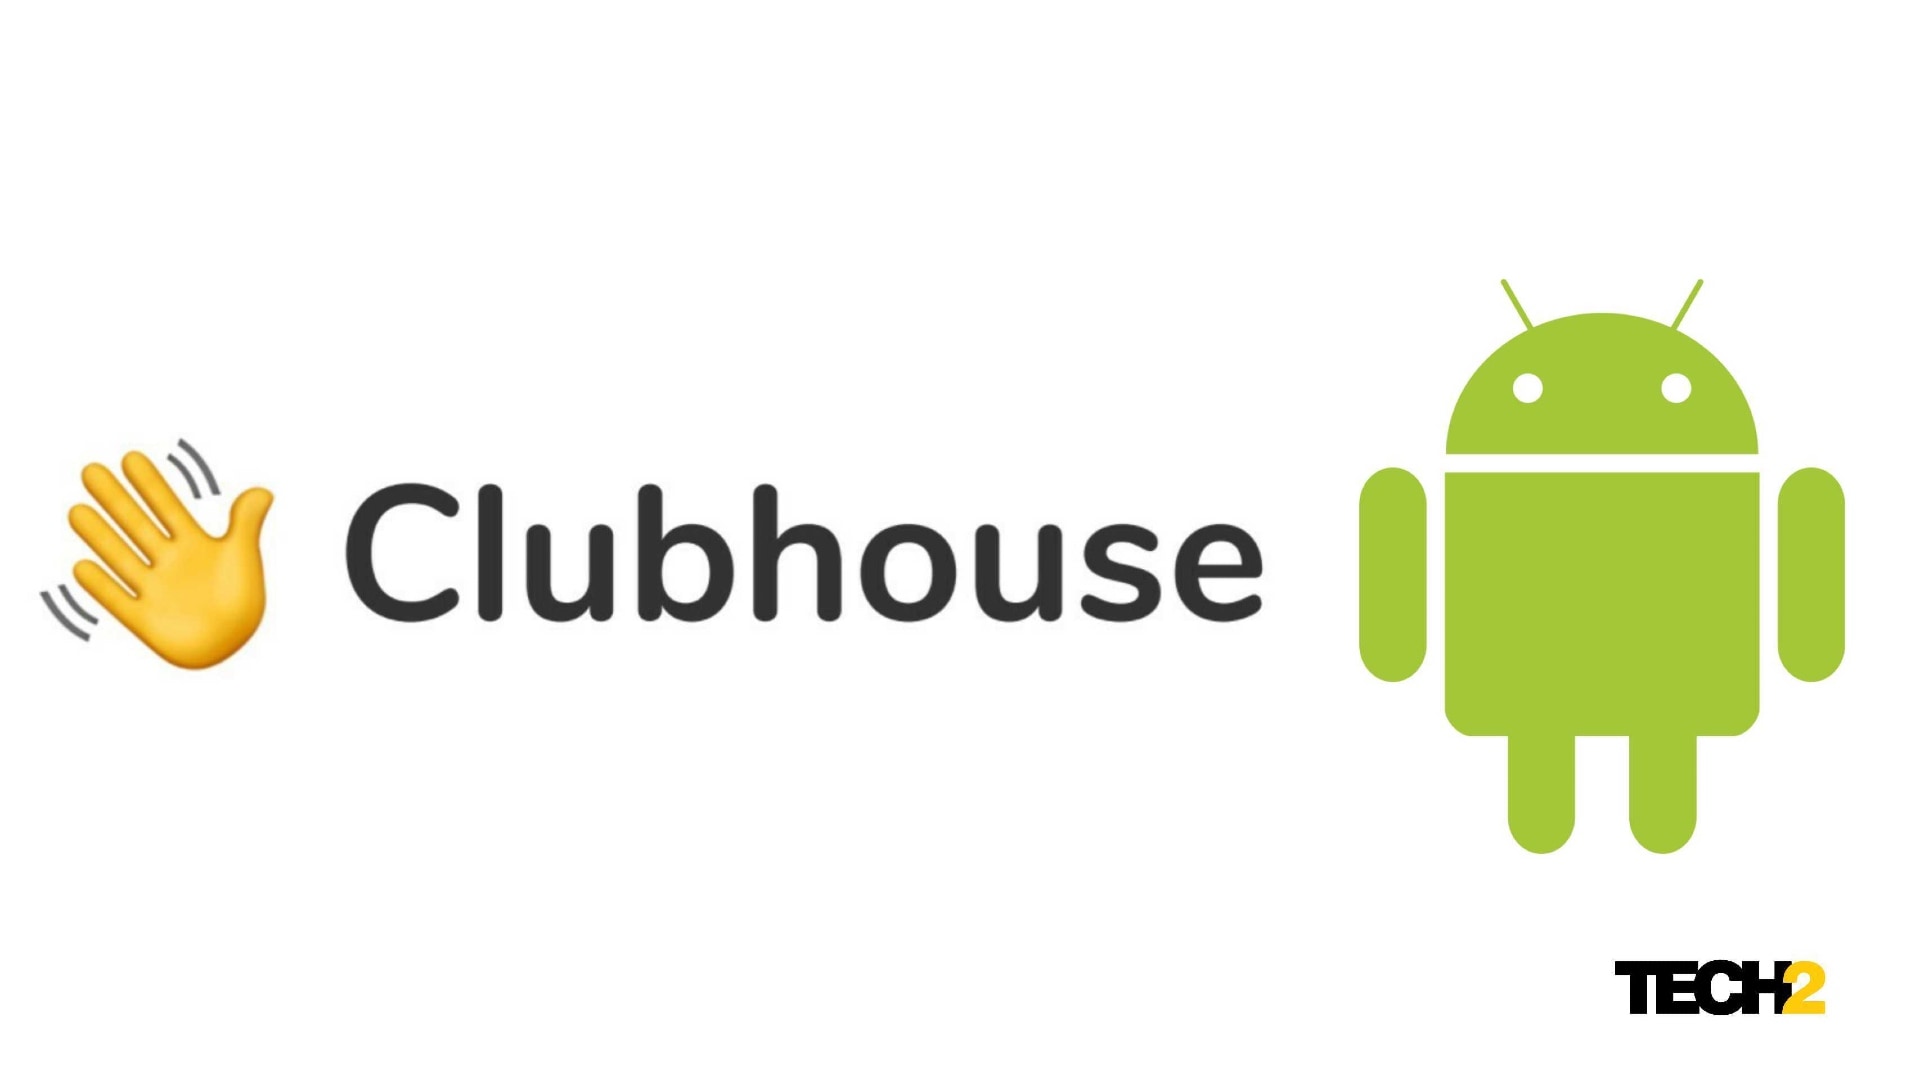 The invite-only Clubhouse Android app has already been rolled out for beta testing. Image: tech2